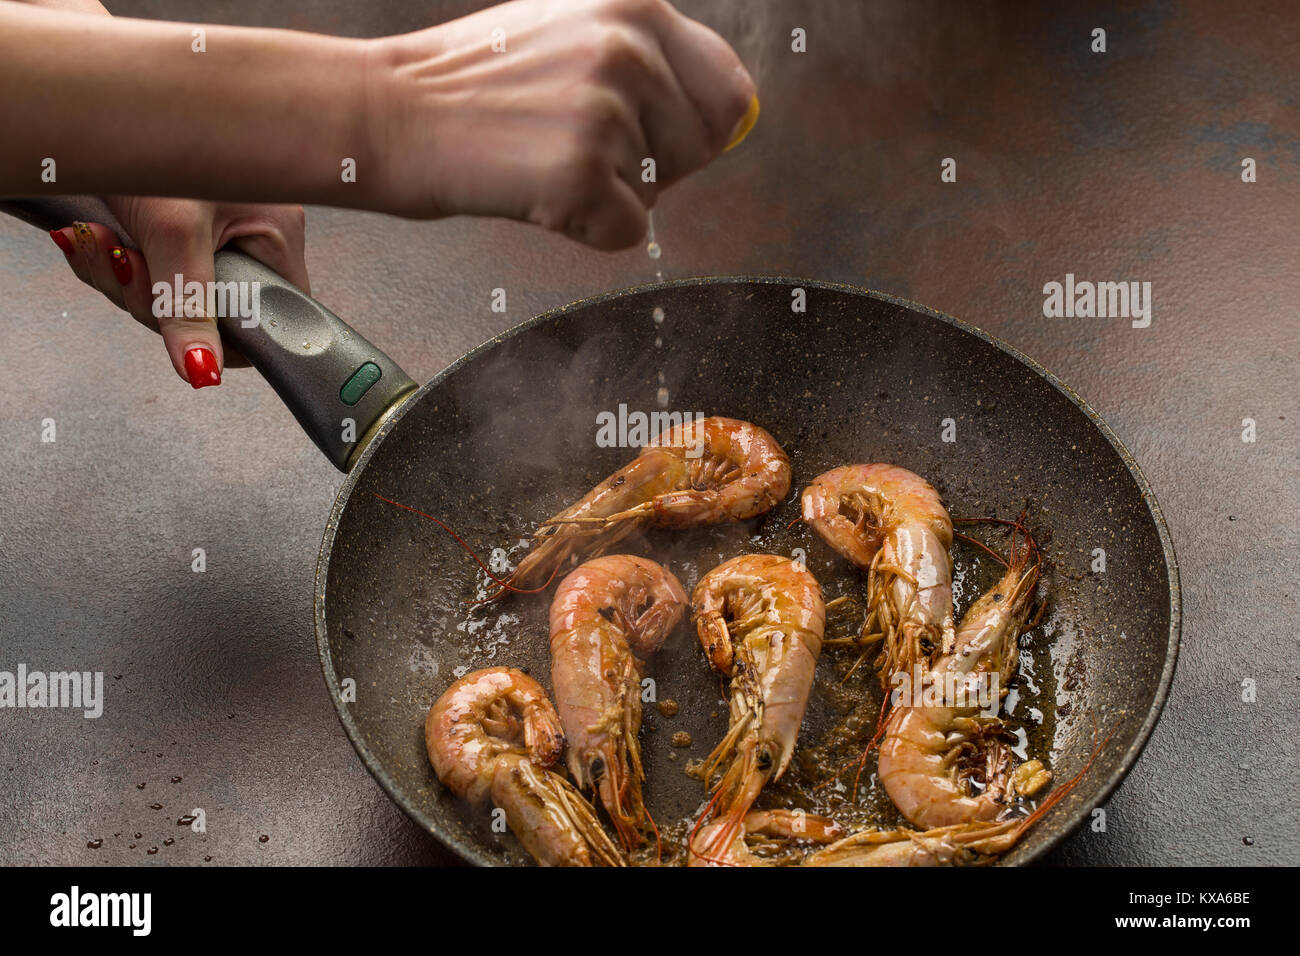 A hand squeezing lemon juice on roasted, grilled large tiger shrimps or langostonos over grey background. process of preparation Stock Photo